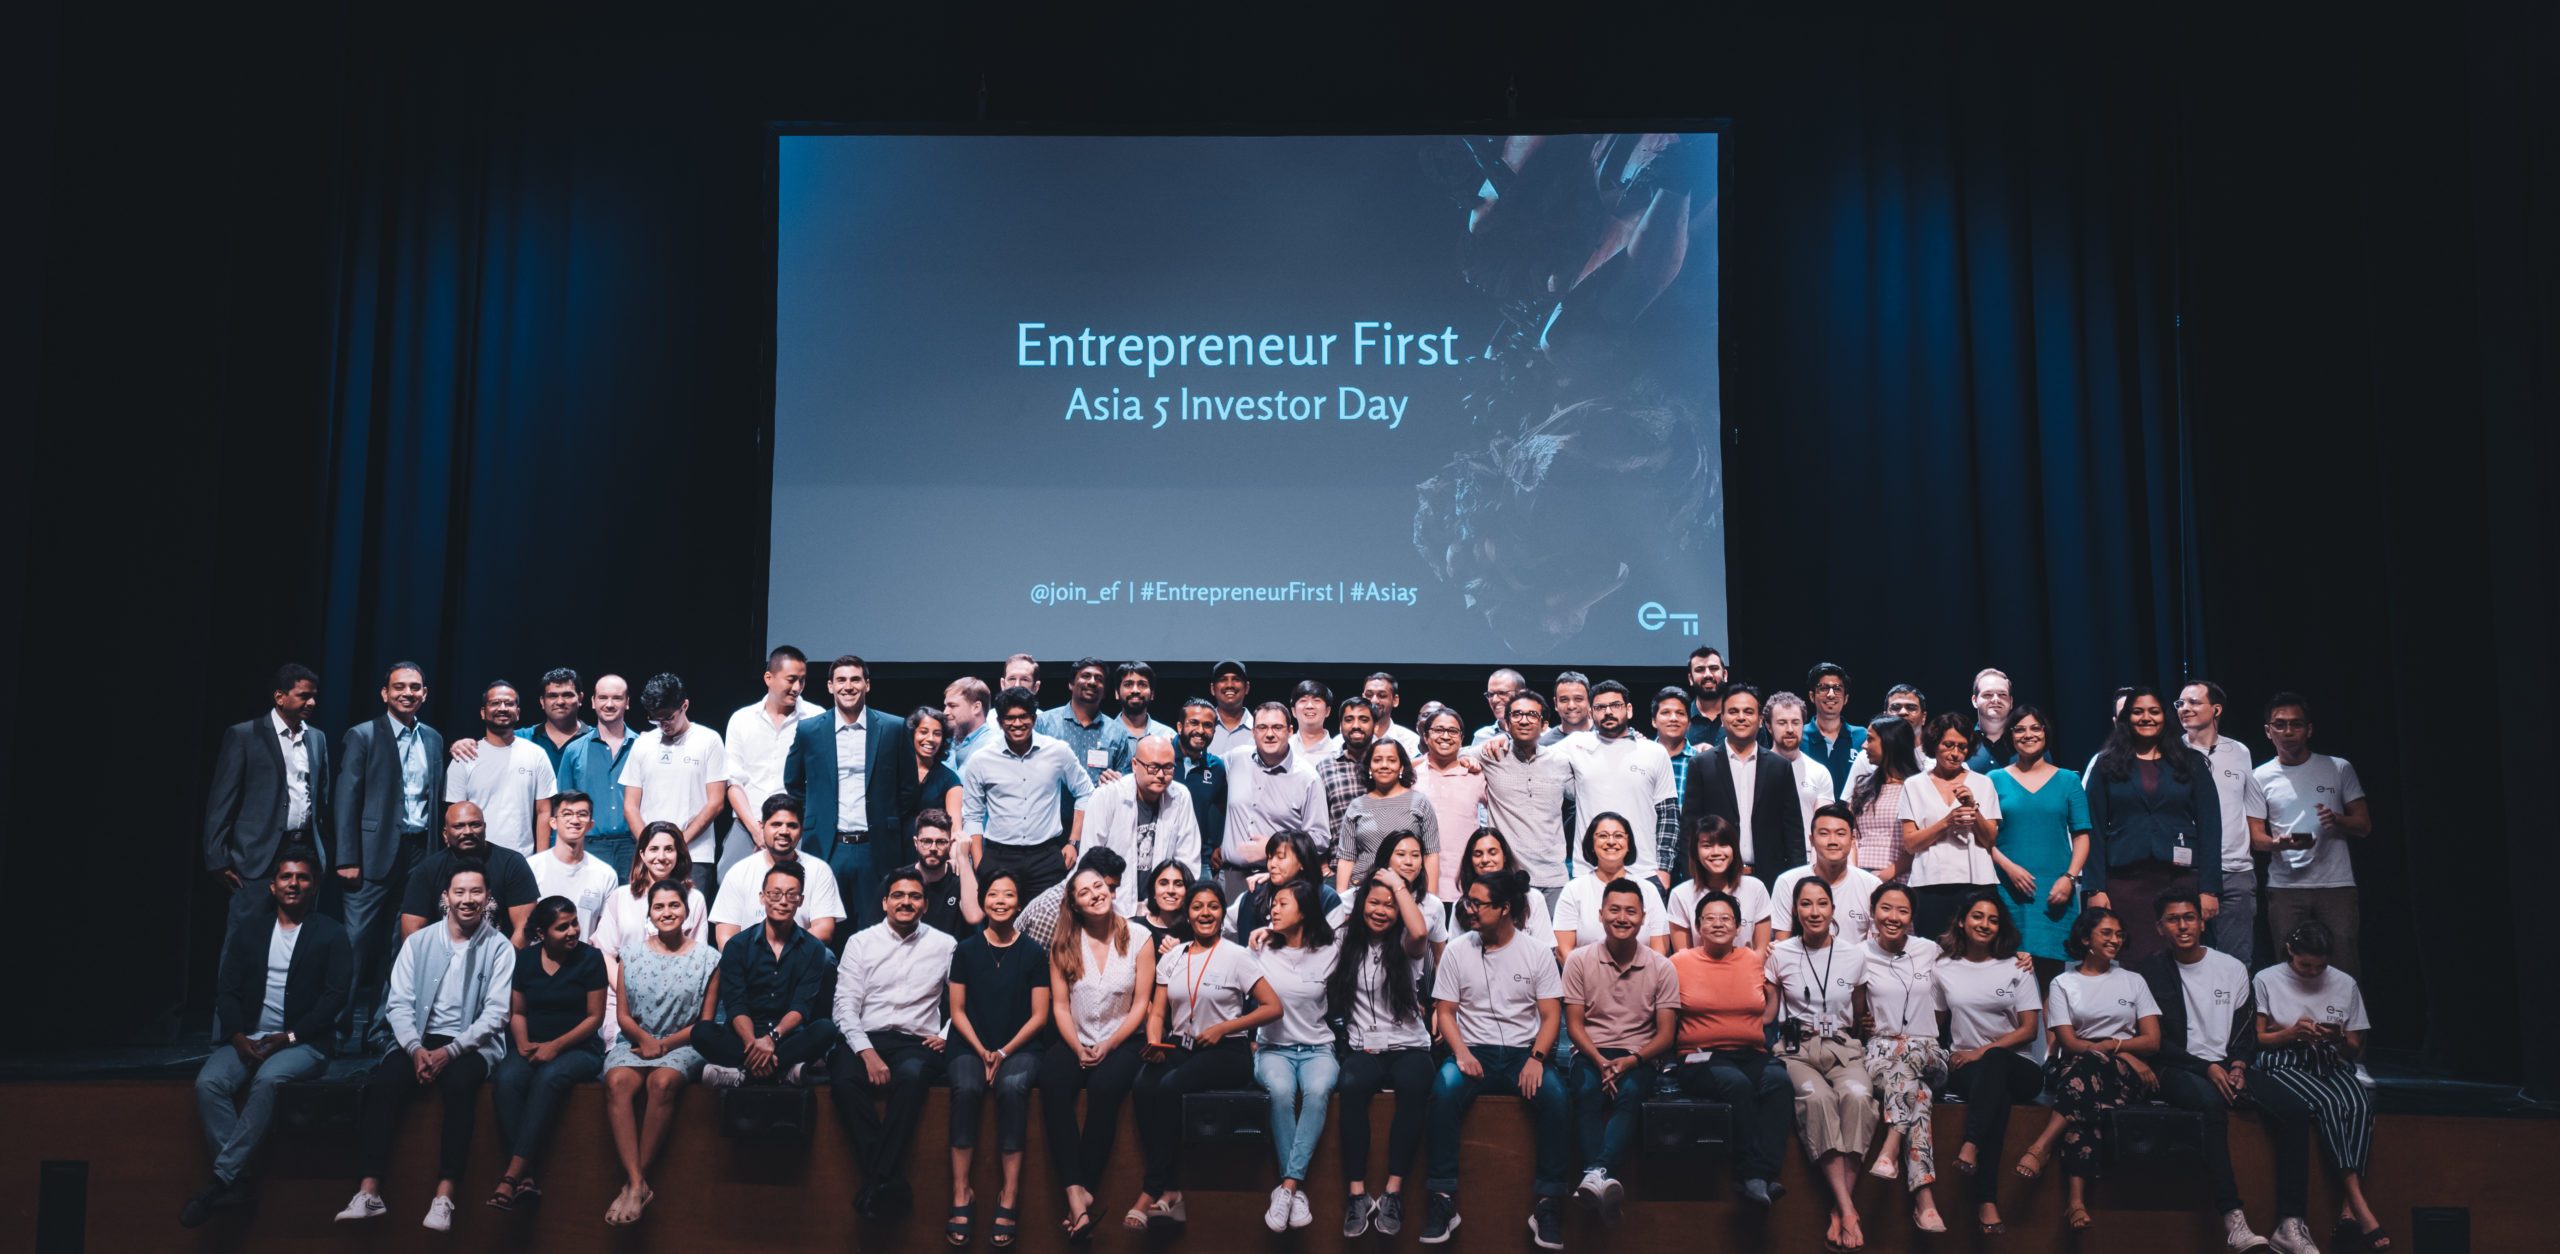 Entrepreneur First's Singapore exit leaves big void for deeptech startups